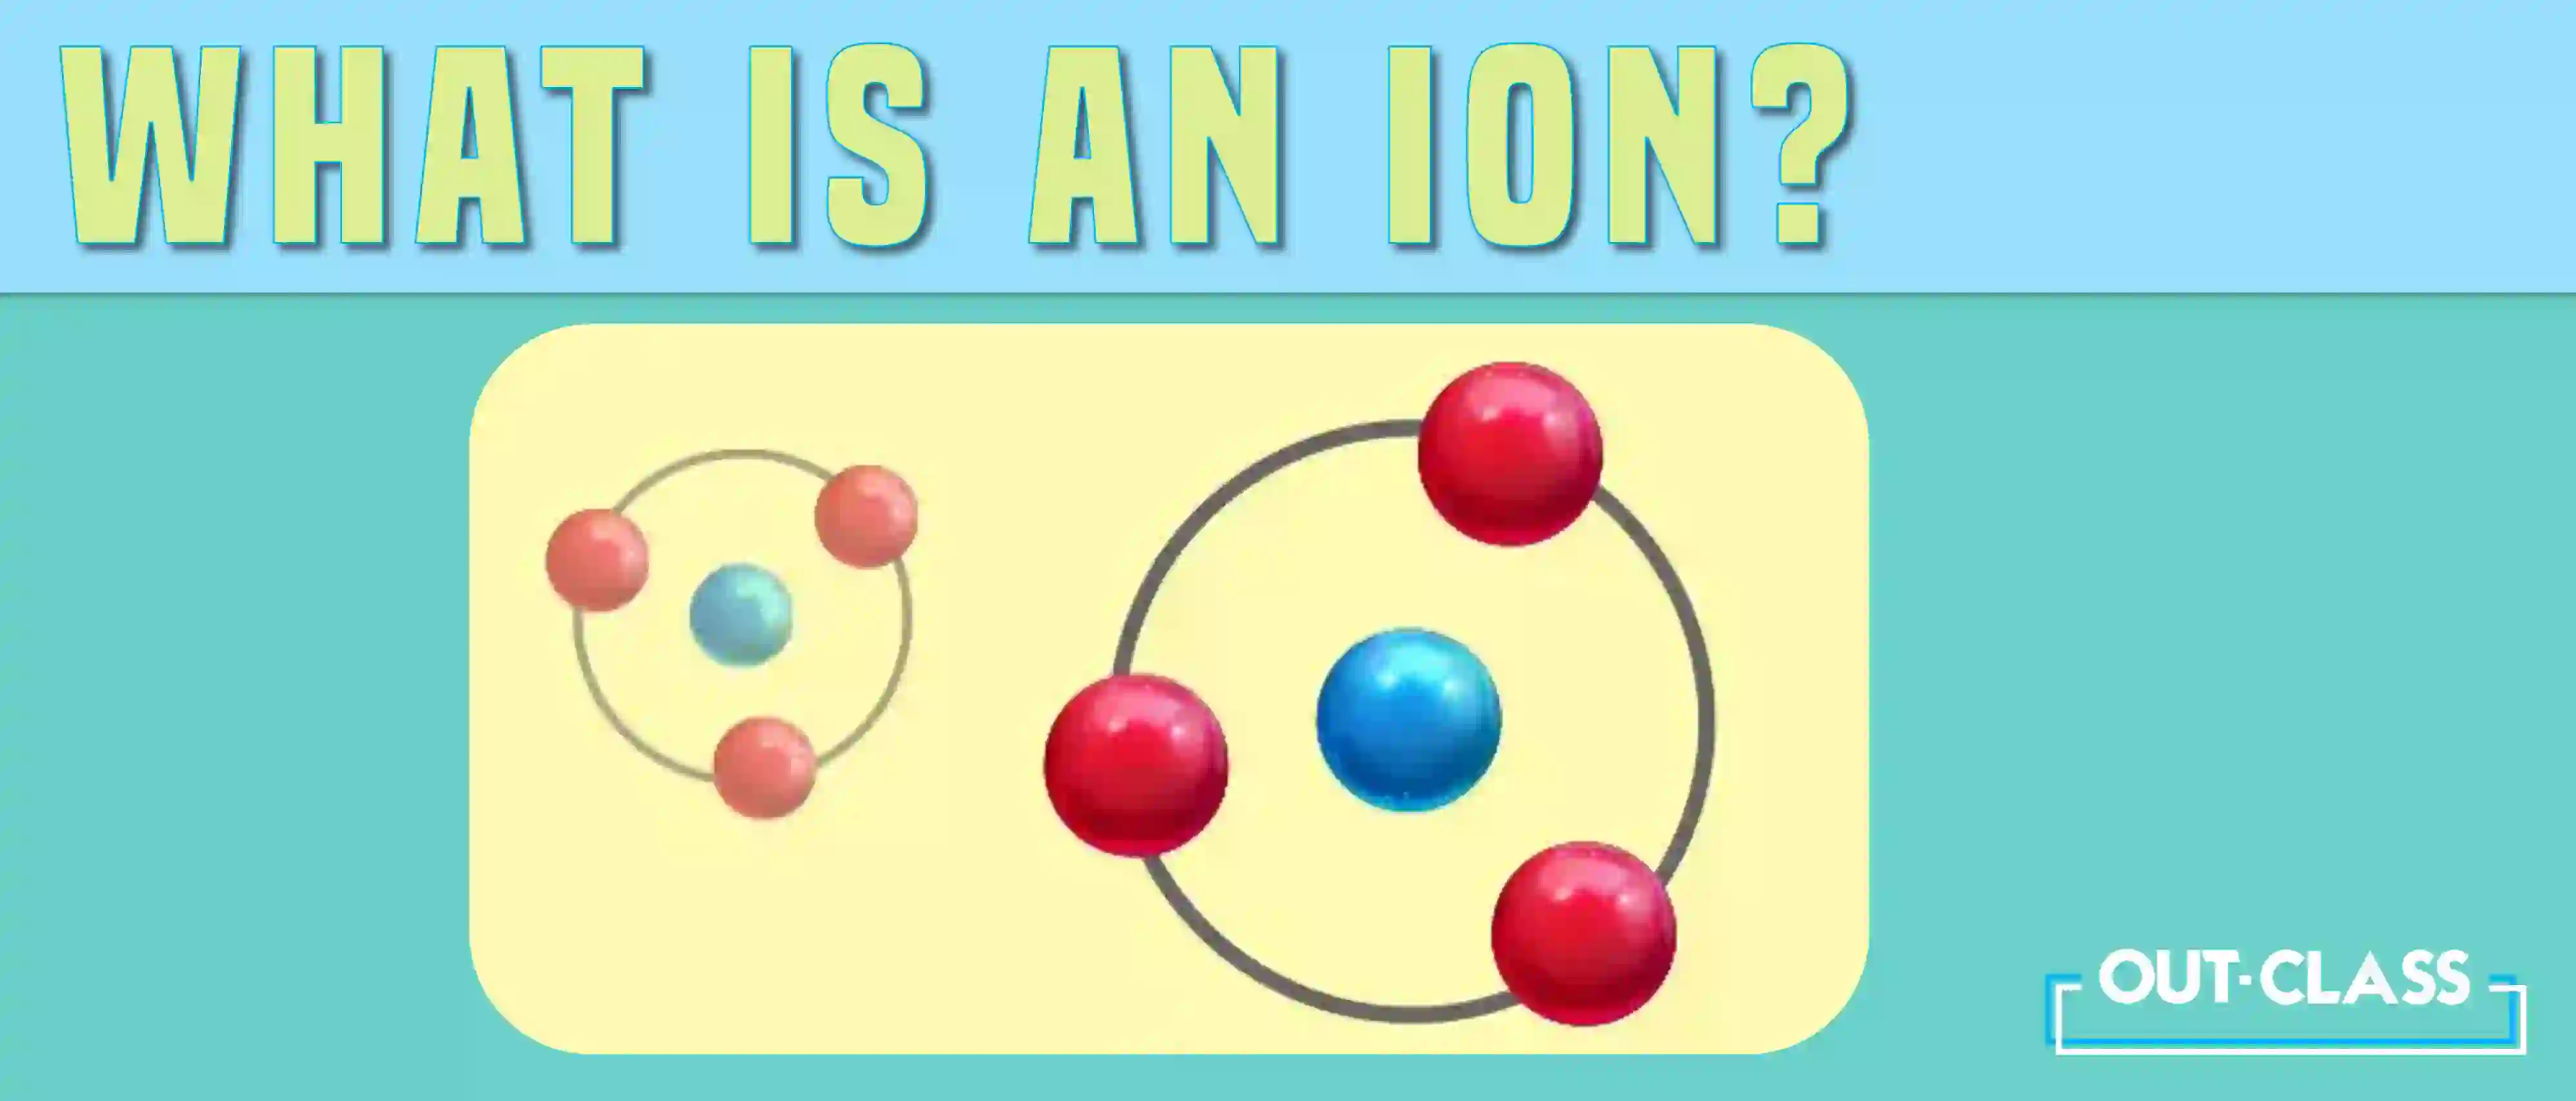 The term “ion” comes from the Greek word for ‘going’ and was first used by English chemist and physicist Michael Faraday in 1834 to describe the process of electrolysis. An ion is formed when an atom becomes electrically charged due to either the loss or gain of electrons. This can happen due to chemical reactions or external influences.